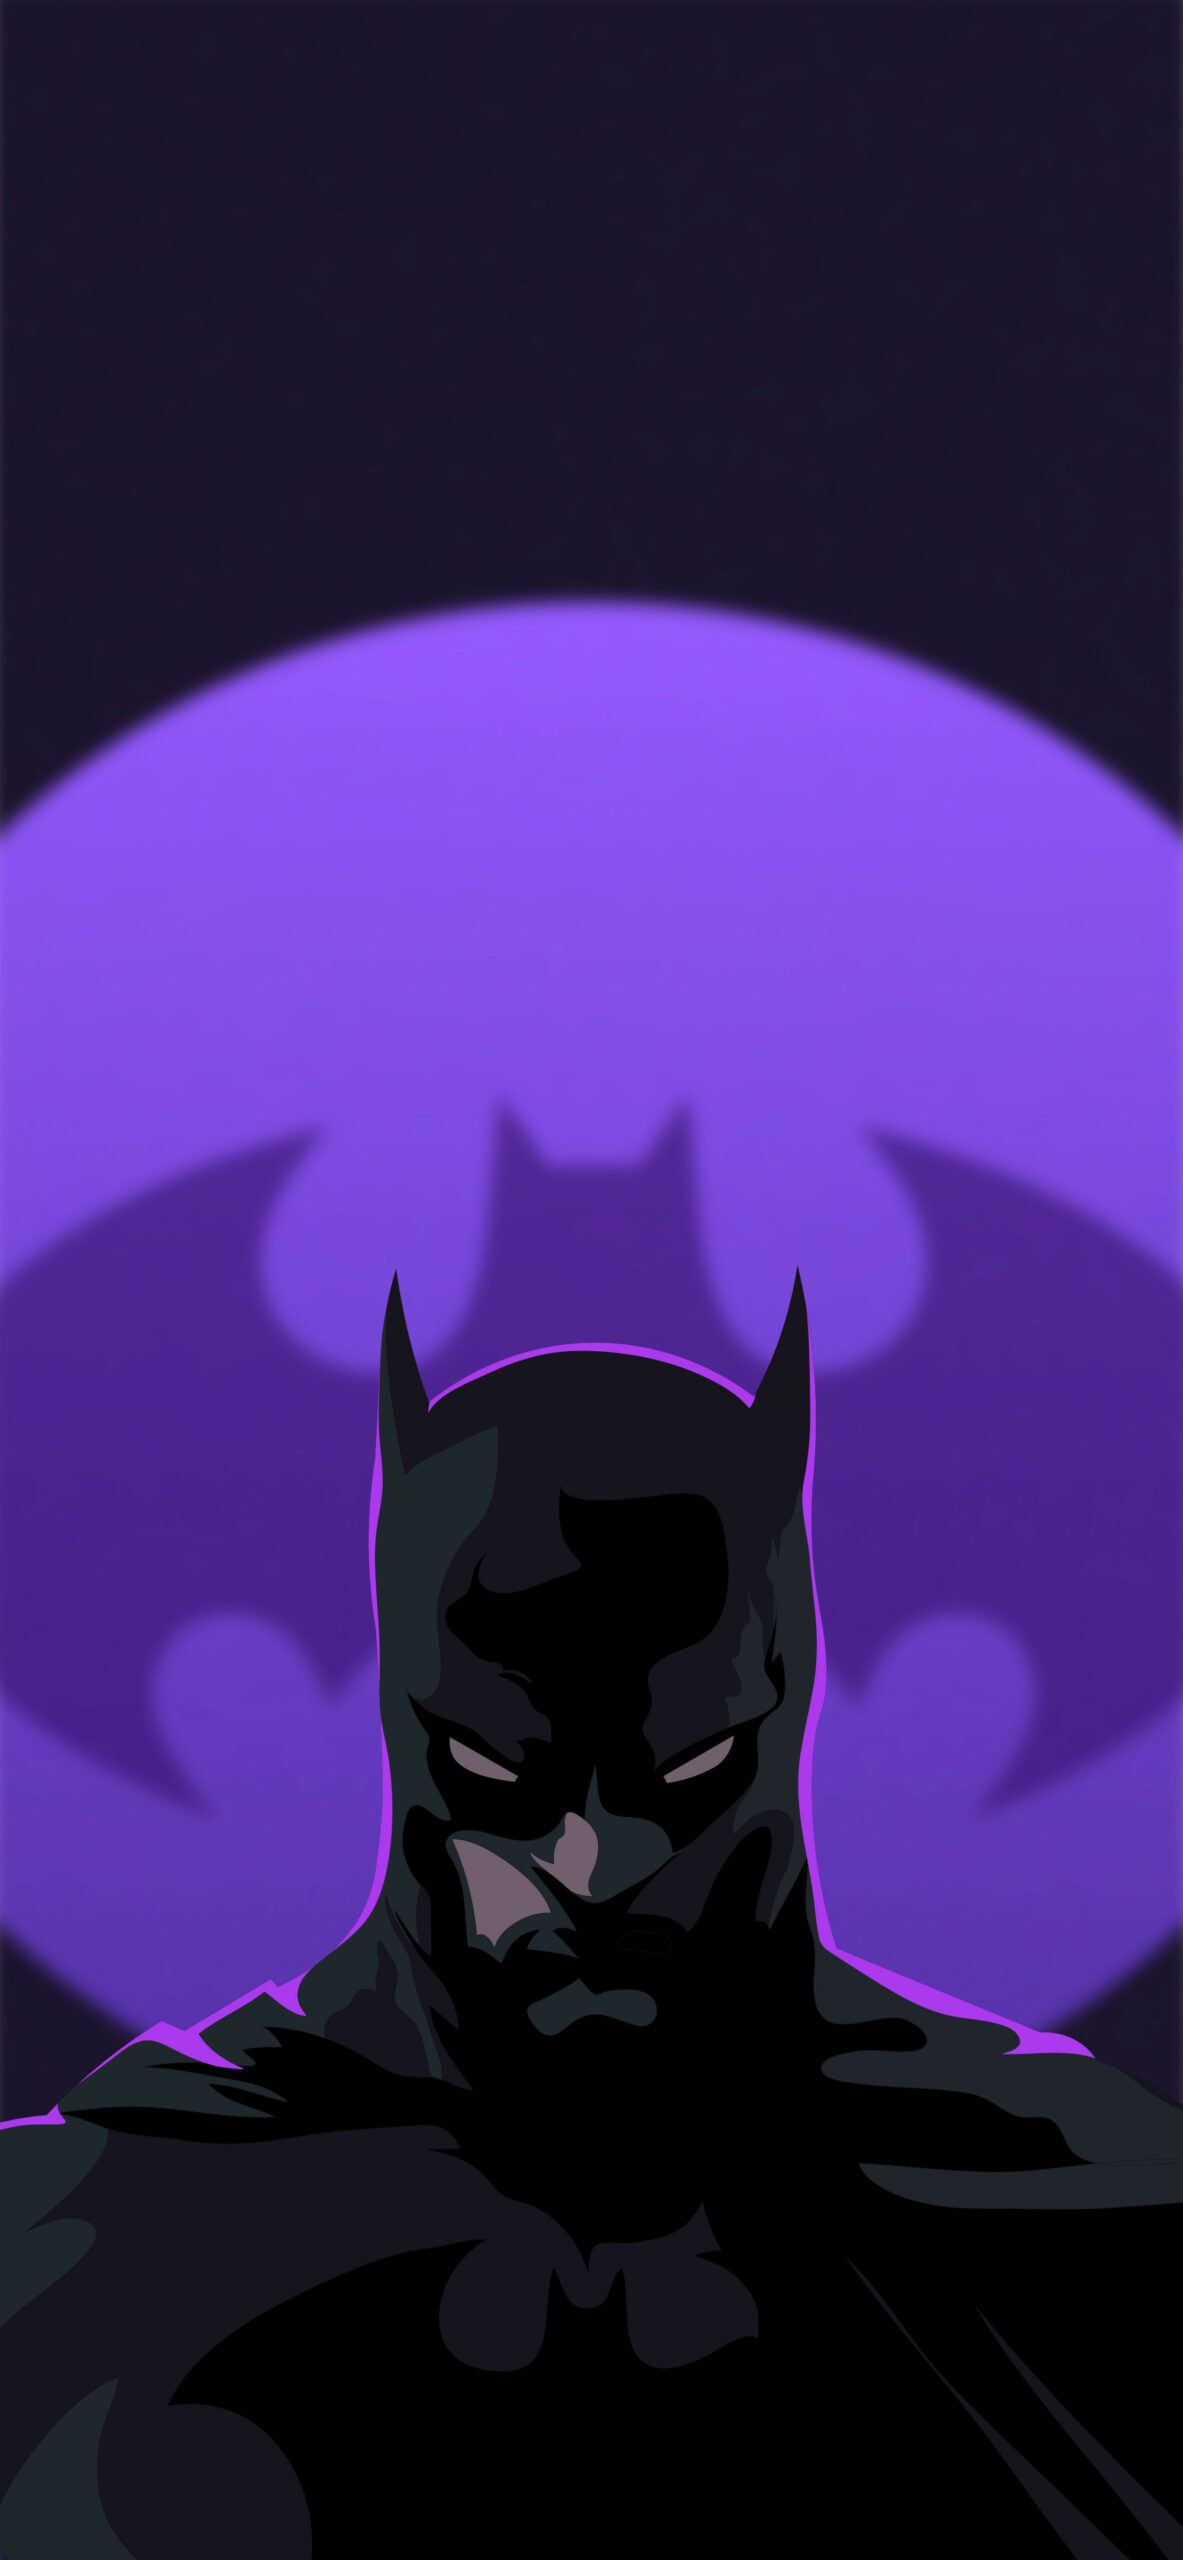 Batman Wallpaper for iPhone & Android